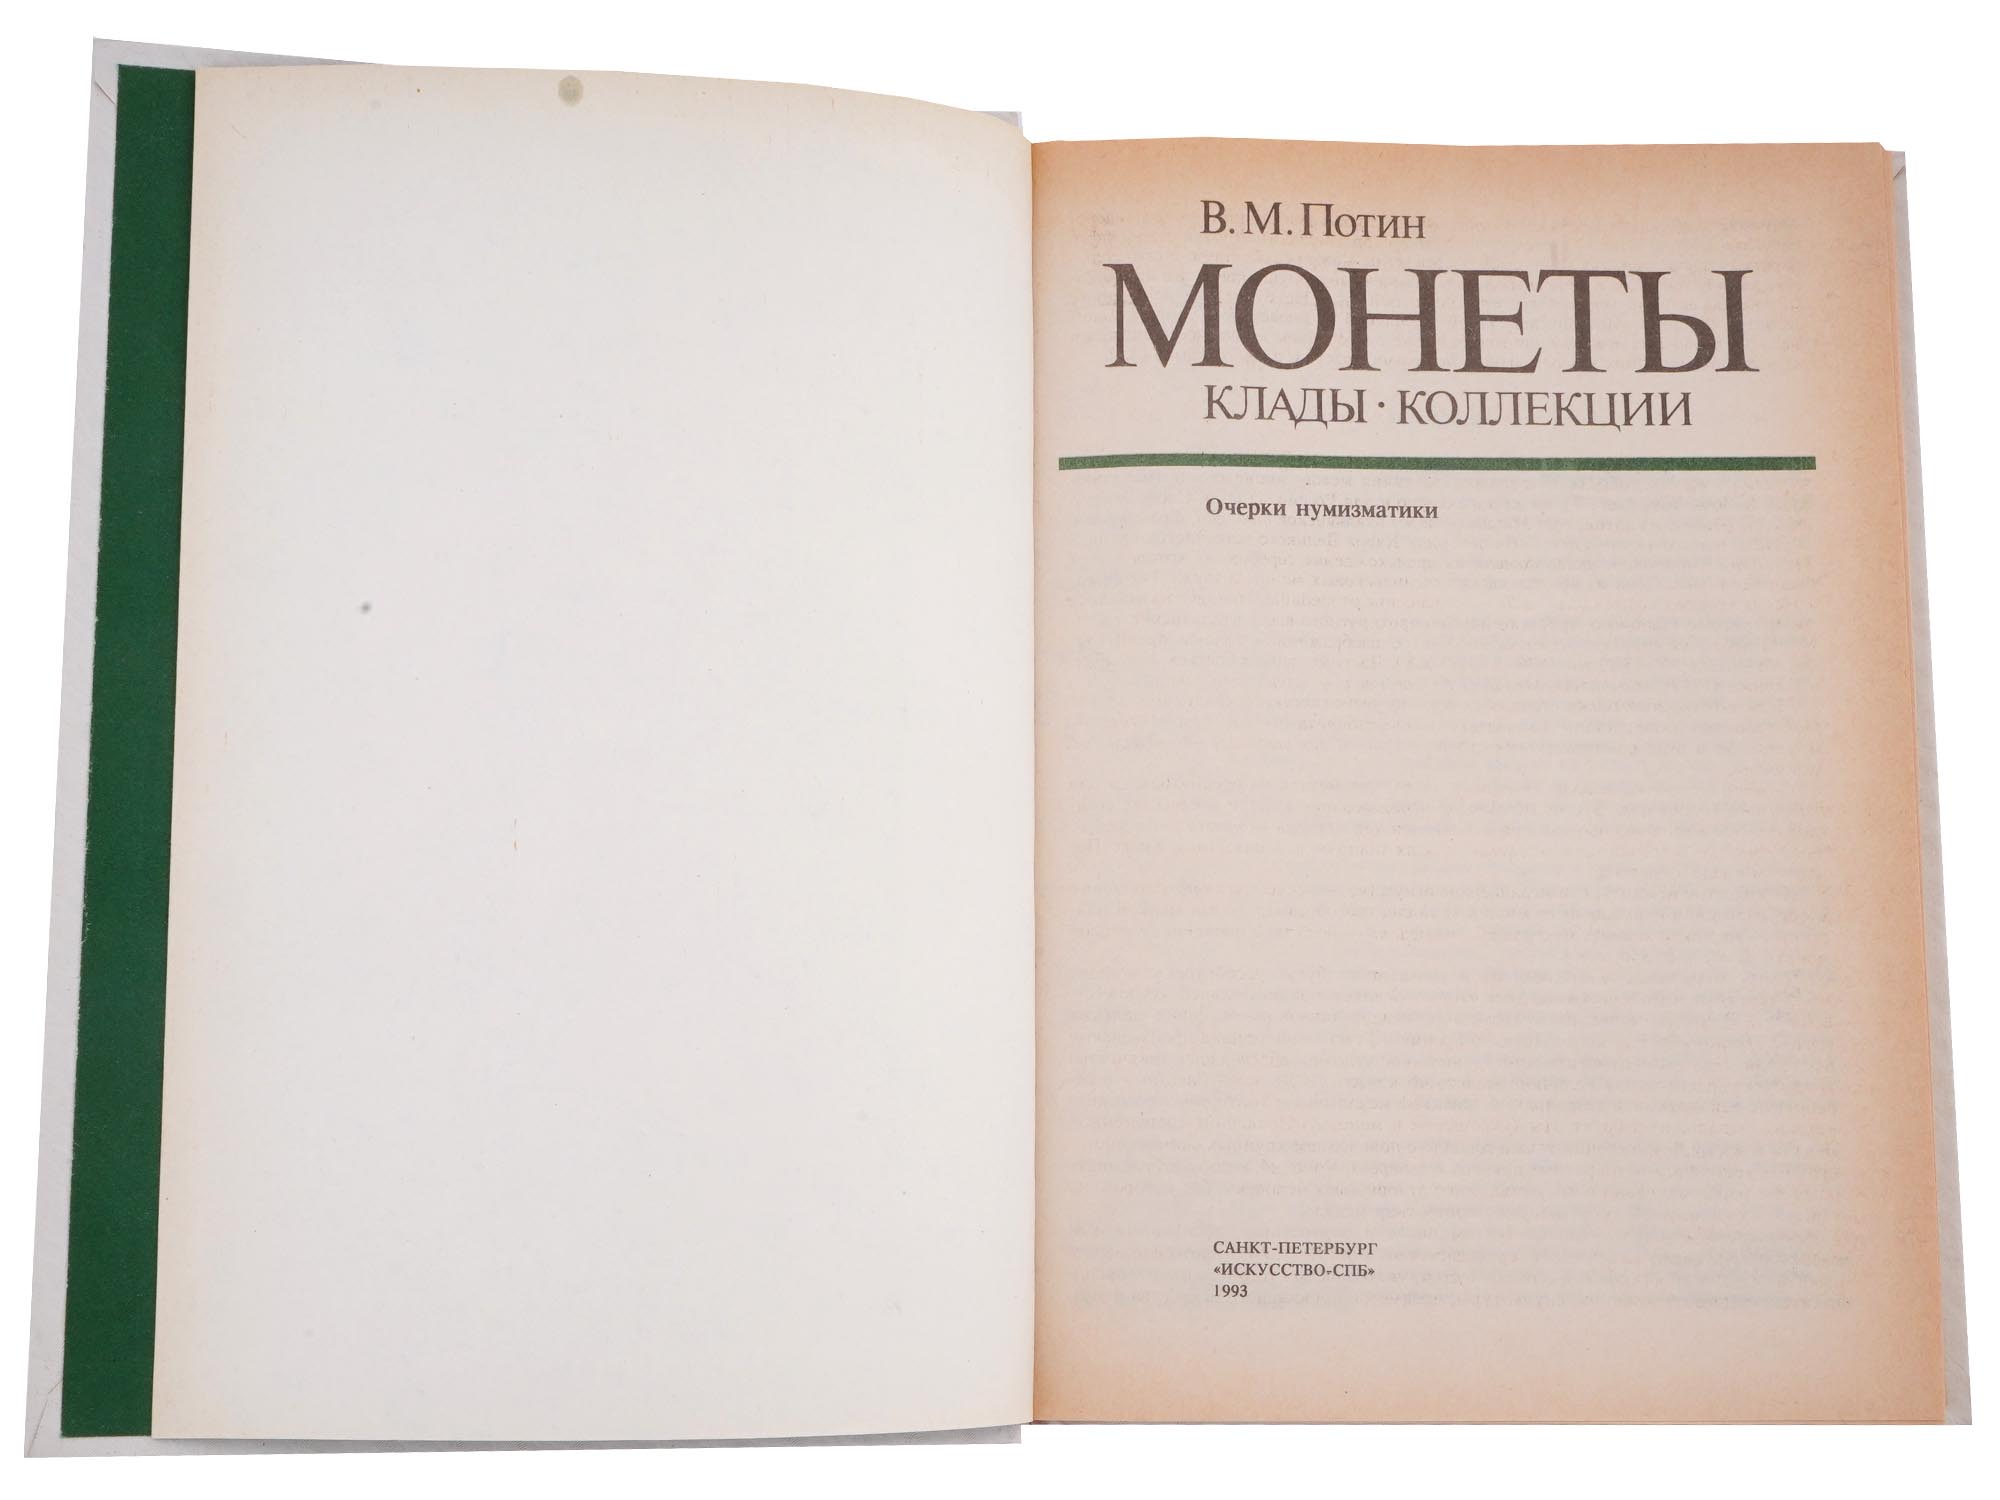 VINTAGE RUSSIAN SOVIET NUMISMATIC BOOK EDITIONS PIC-7